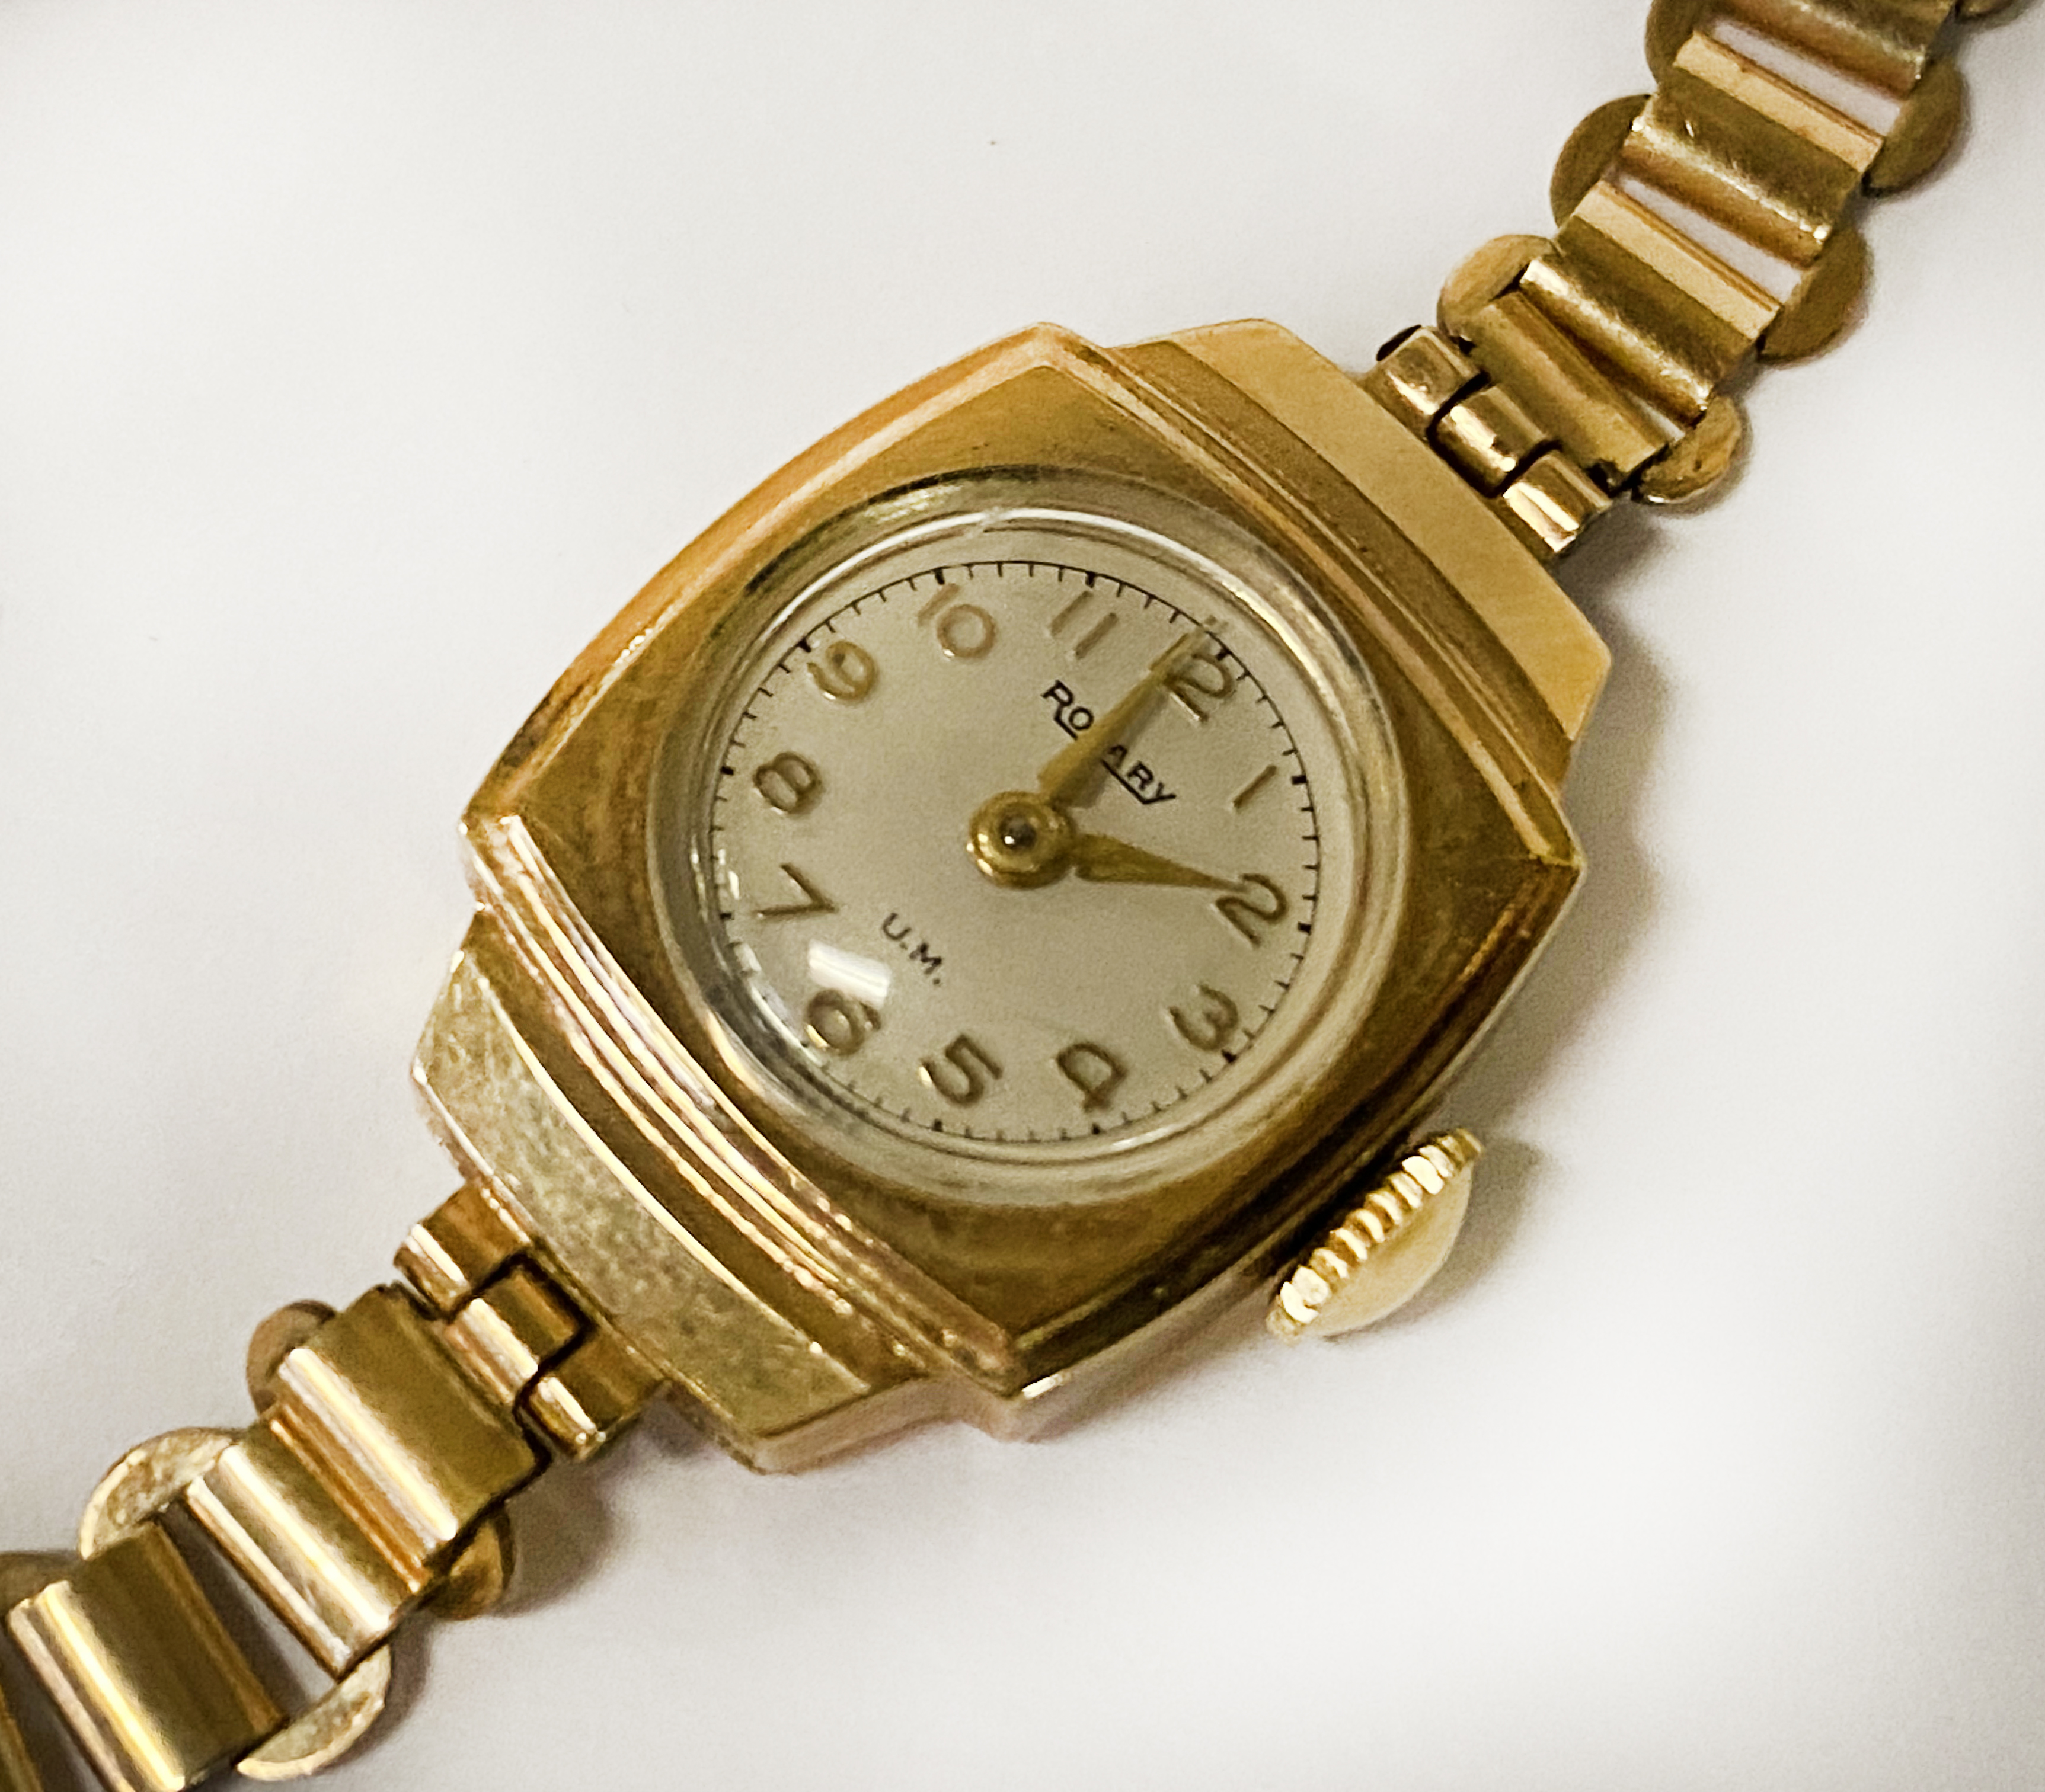 9 CARAT GOLD ROTARY COCKTAIL WATCH STRAP MARKED RG - Image 2 of 2